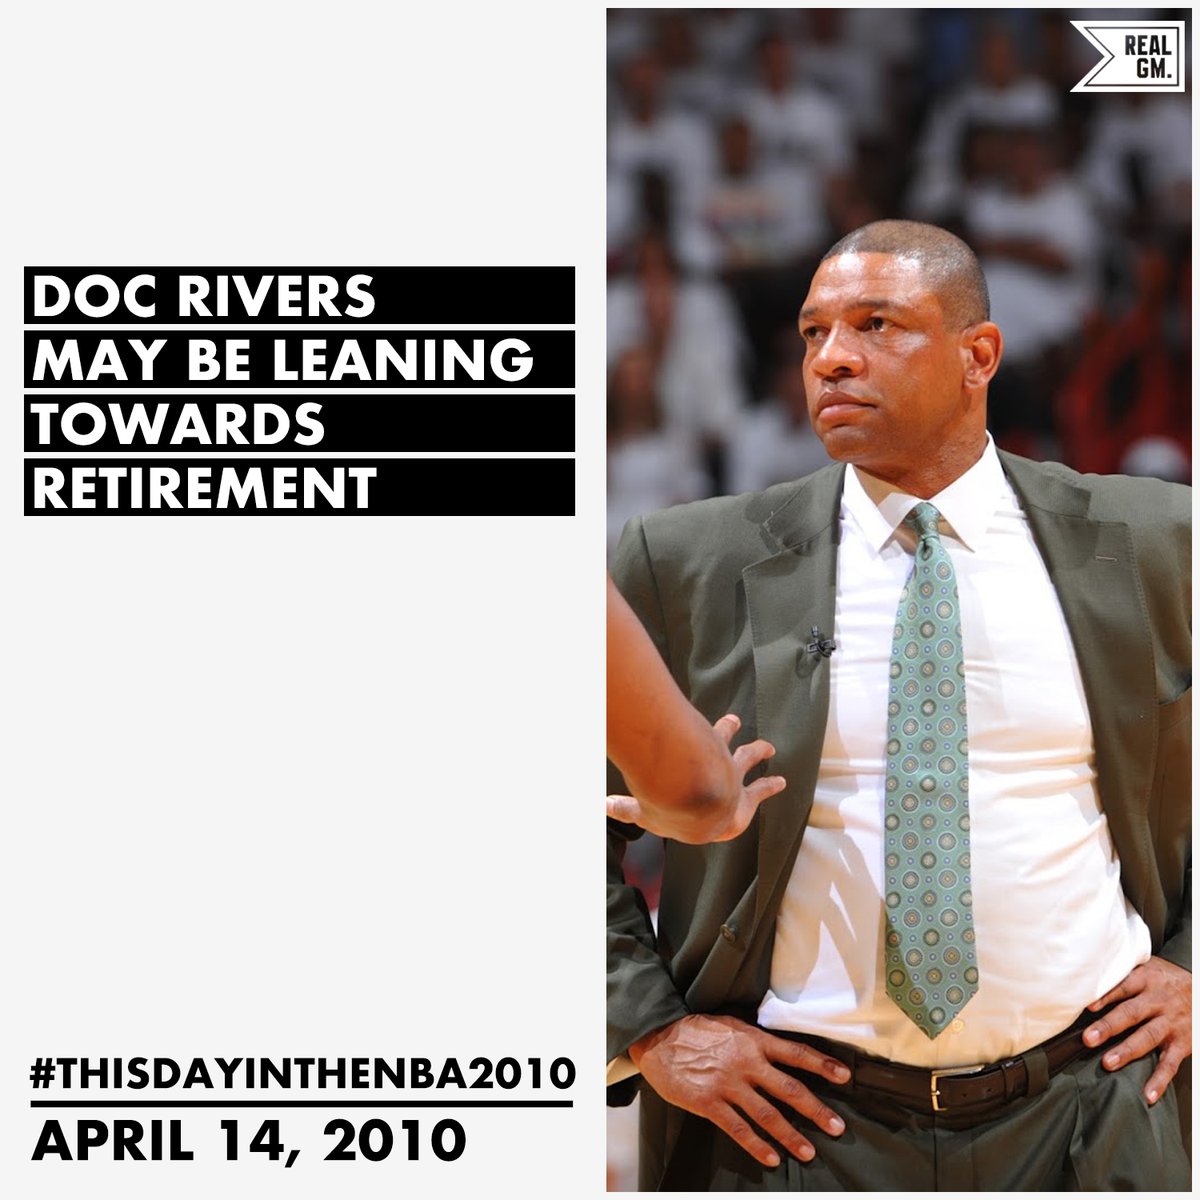  #ThisDayInTheNBA2010April 14, 2010Doc Rivers May Be Leaning Towards Retirement https://basketball.realgm.com/wiretap/203284/Doc-Rivers-May-Be-Leaning-Towards-Retirement